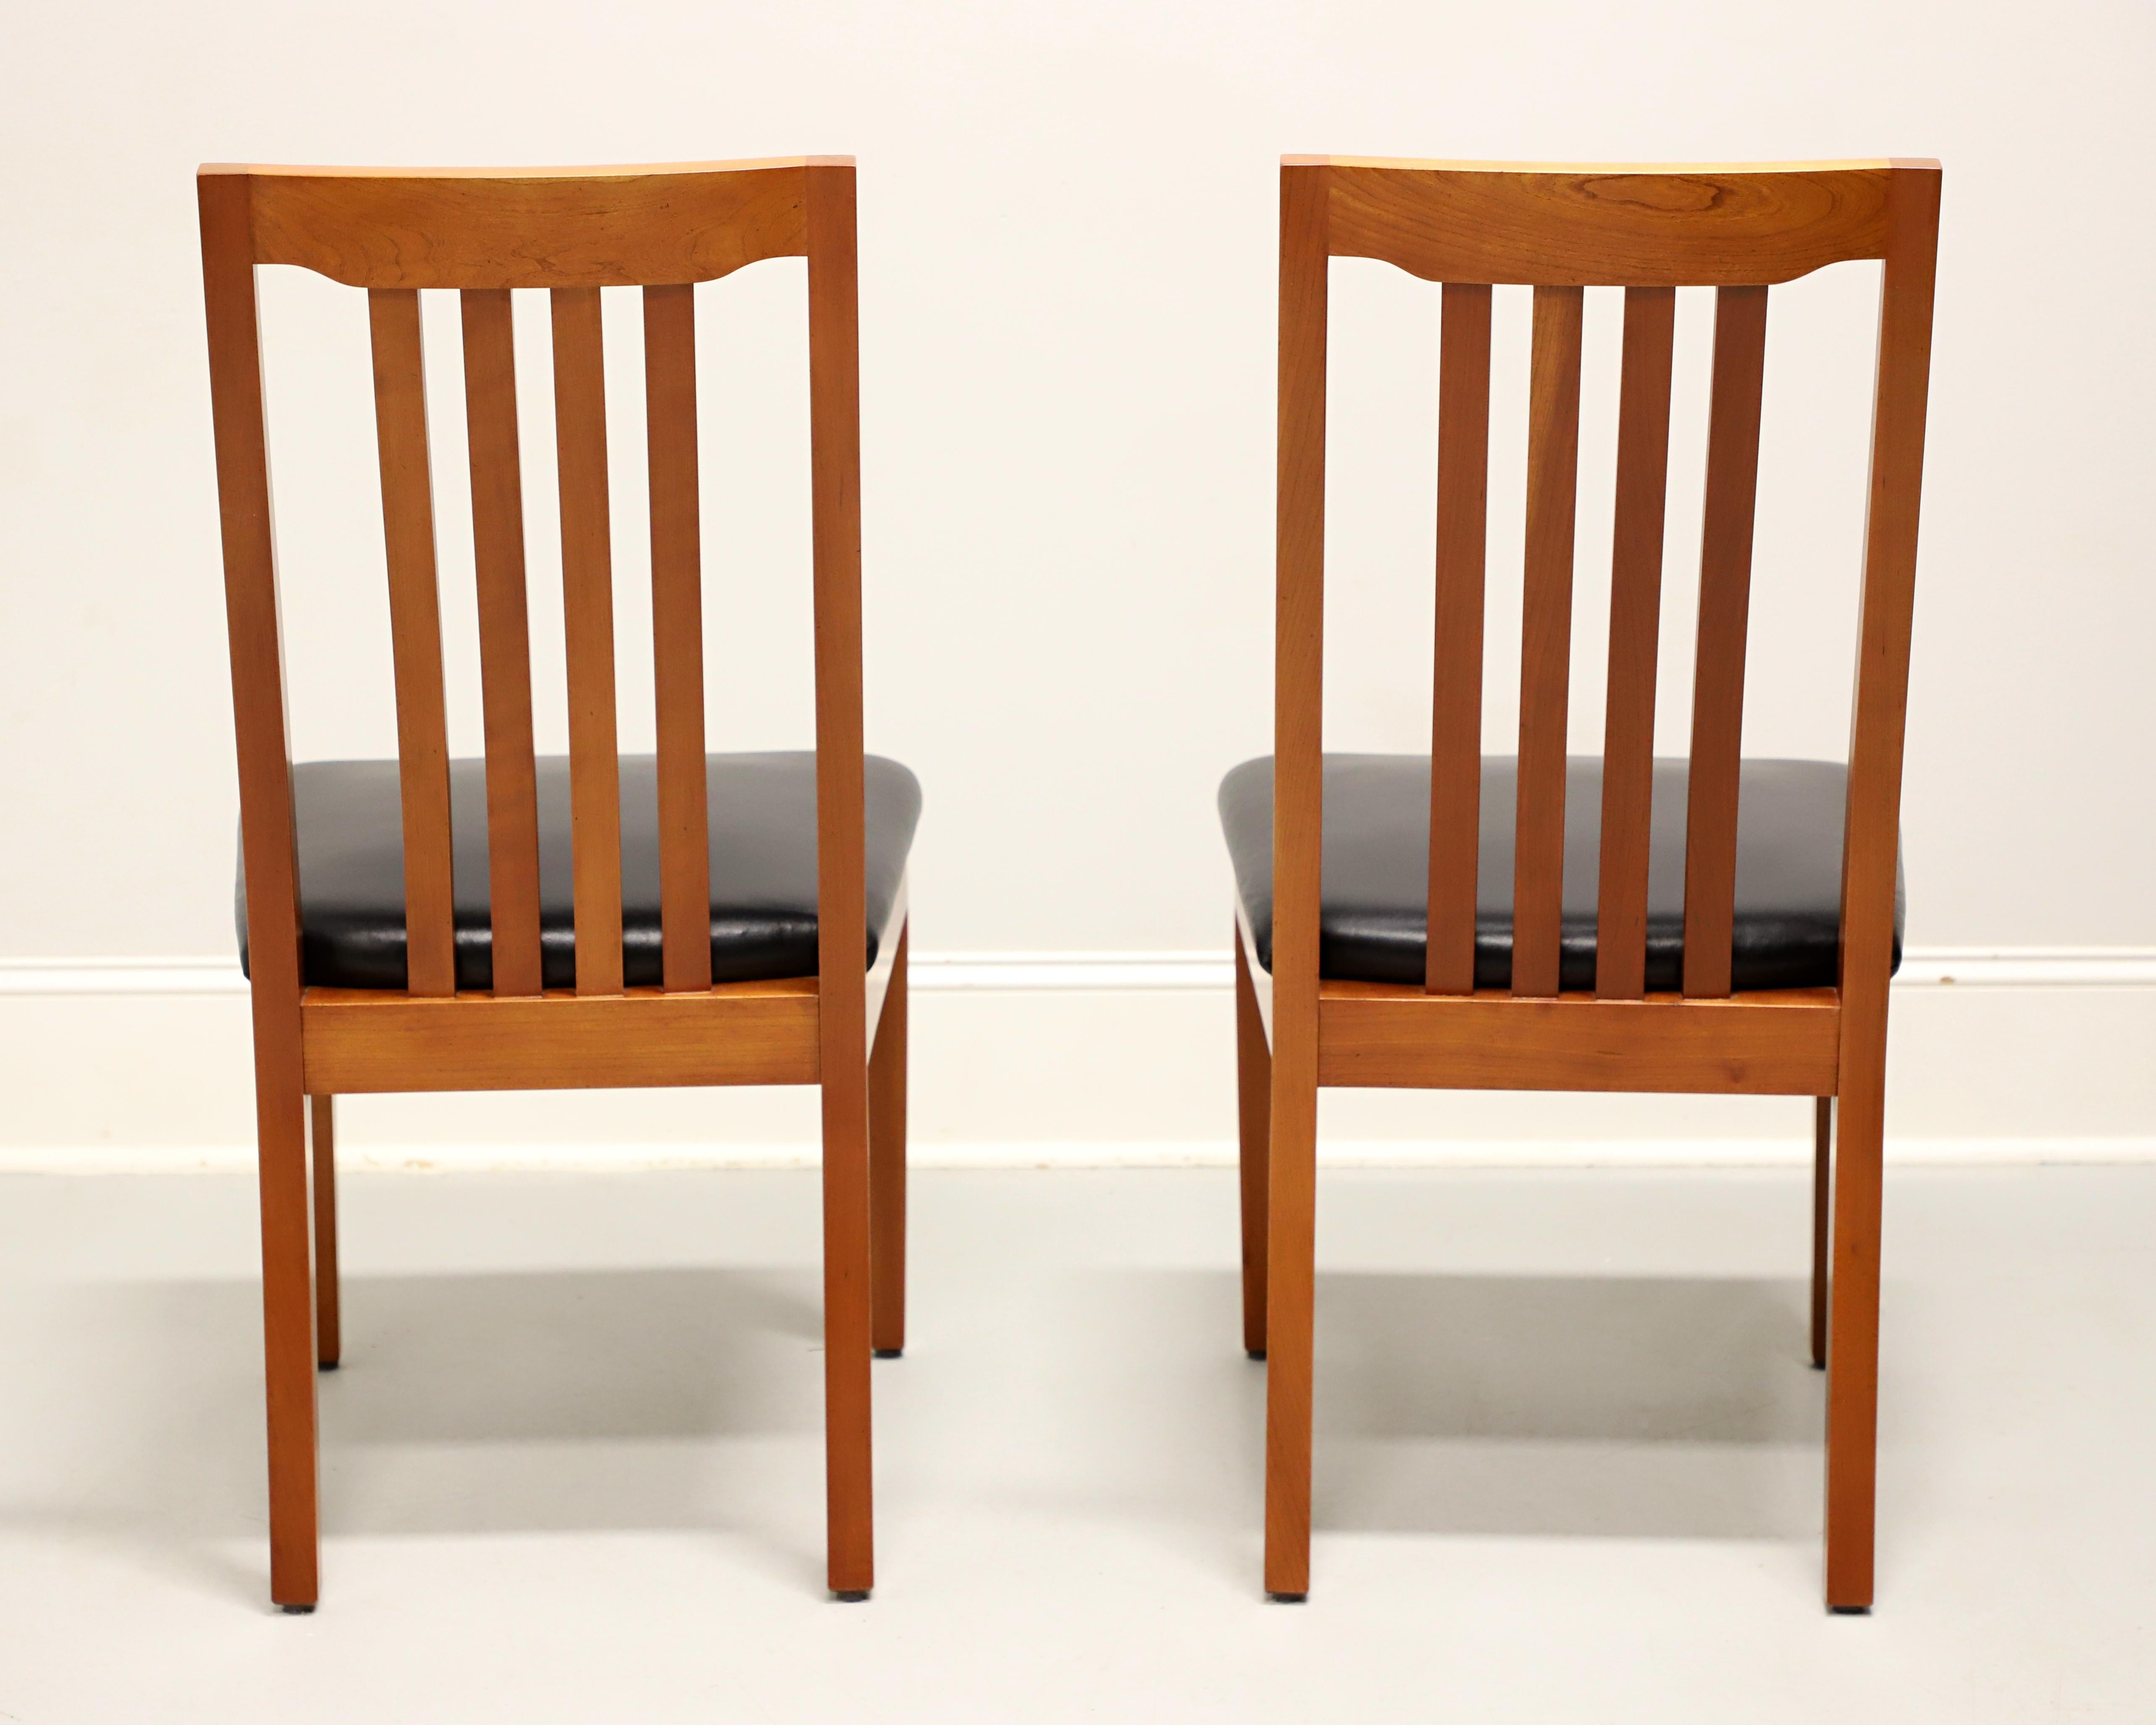 ROBERT BERGELIN Custom Solid Cherry Mission Dining Side Chairs - Pair C In Good Condition For Sale In Charlotte, NC